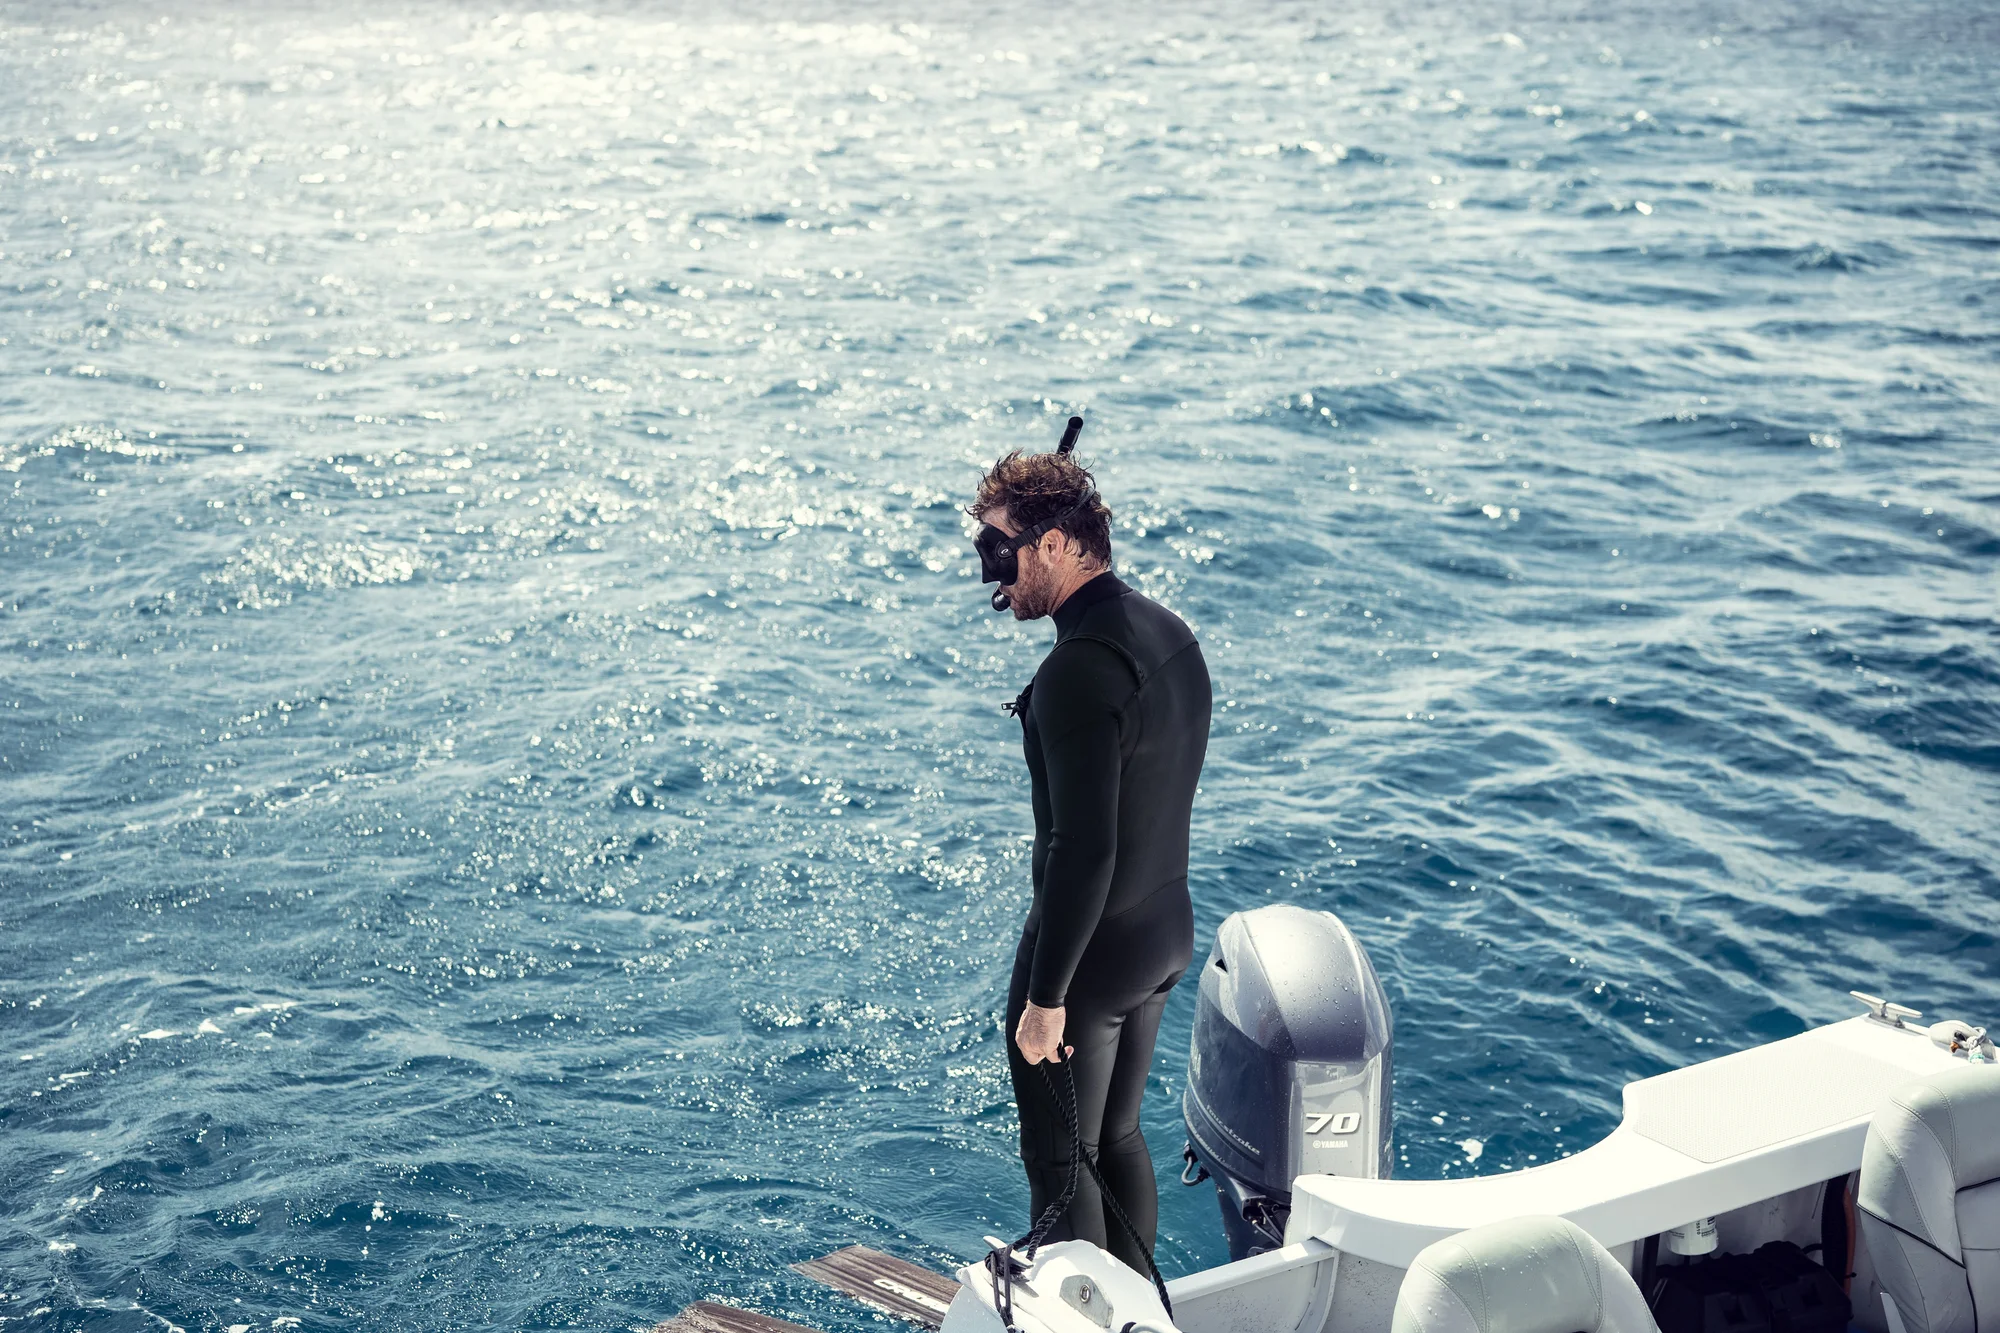 Johnny stands on the edge of the boat in a wetsuit, snorkeling gear and flippers.